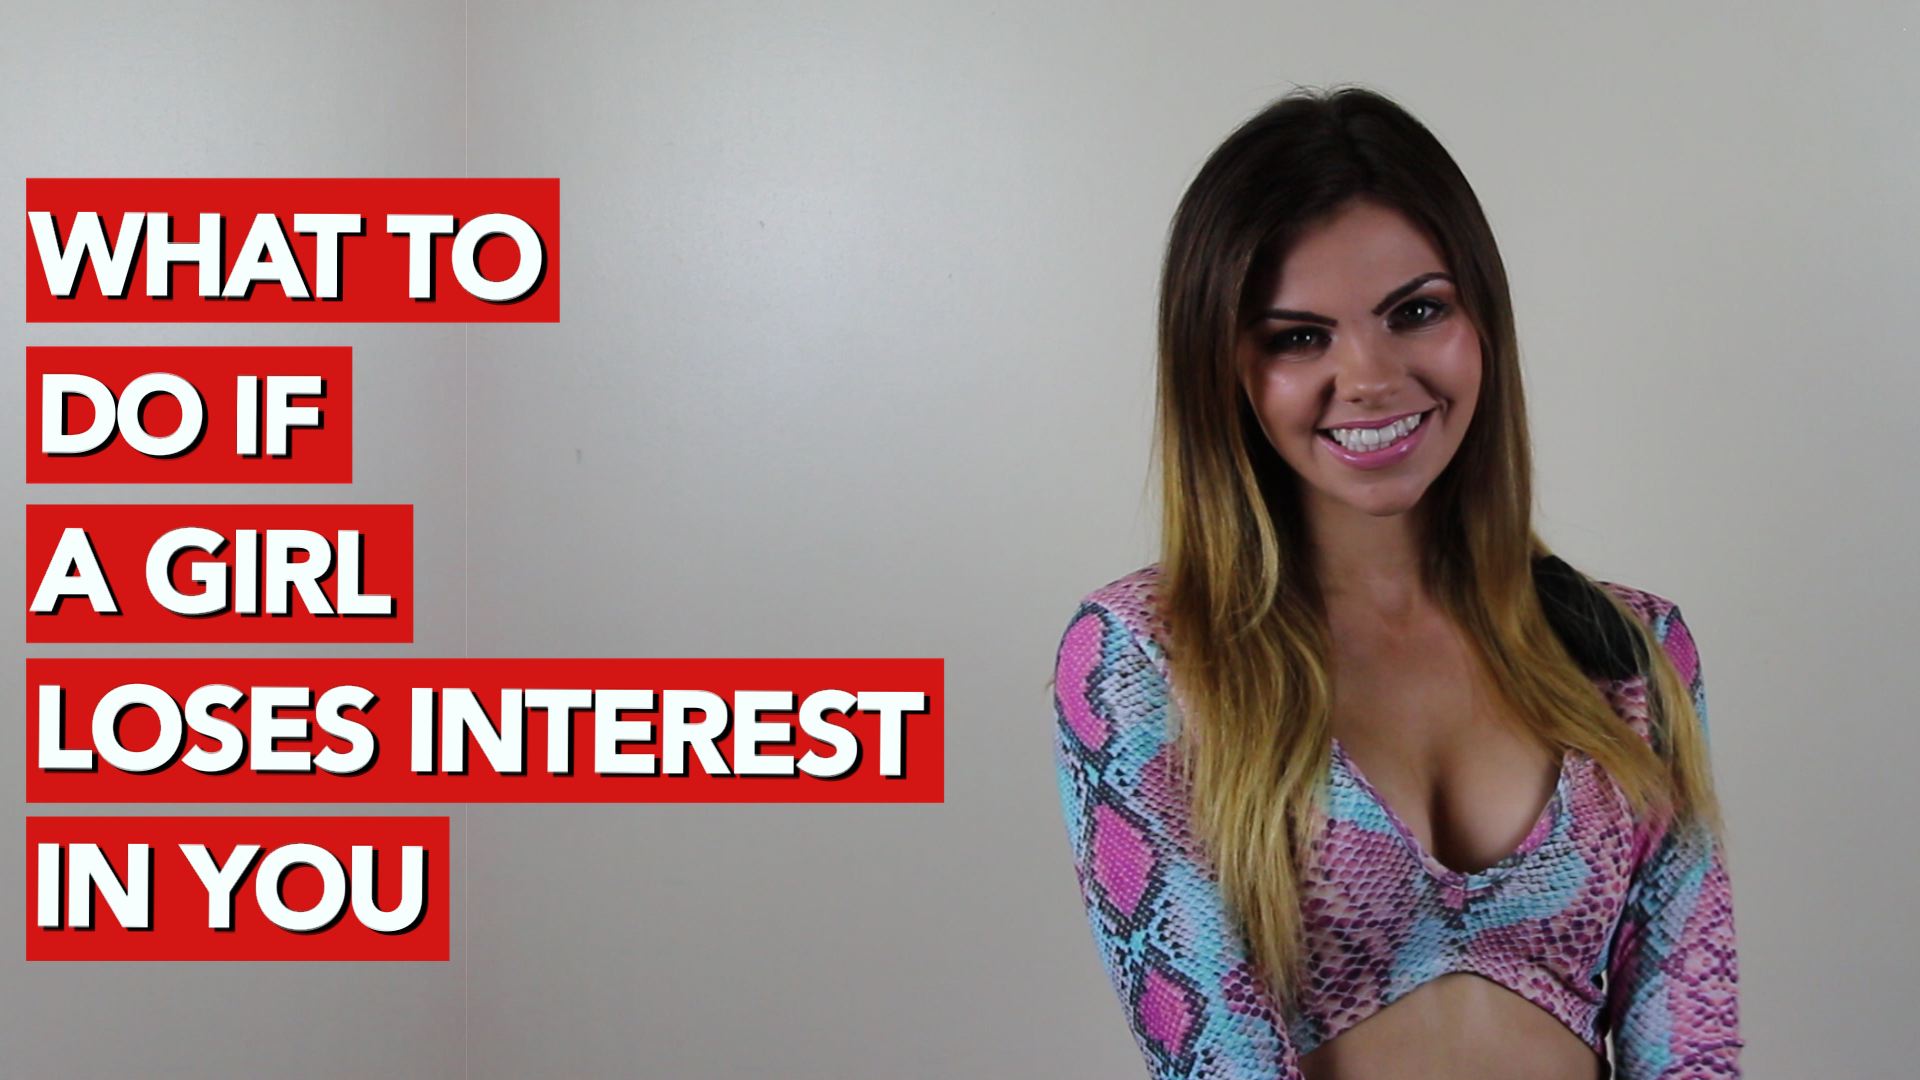 WHAT TO DO IF A GIRL LOSES INTEREST IN YOU